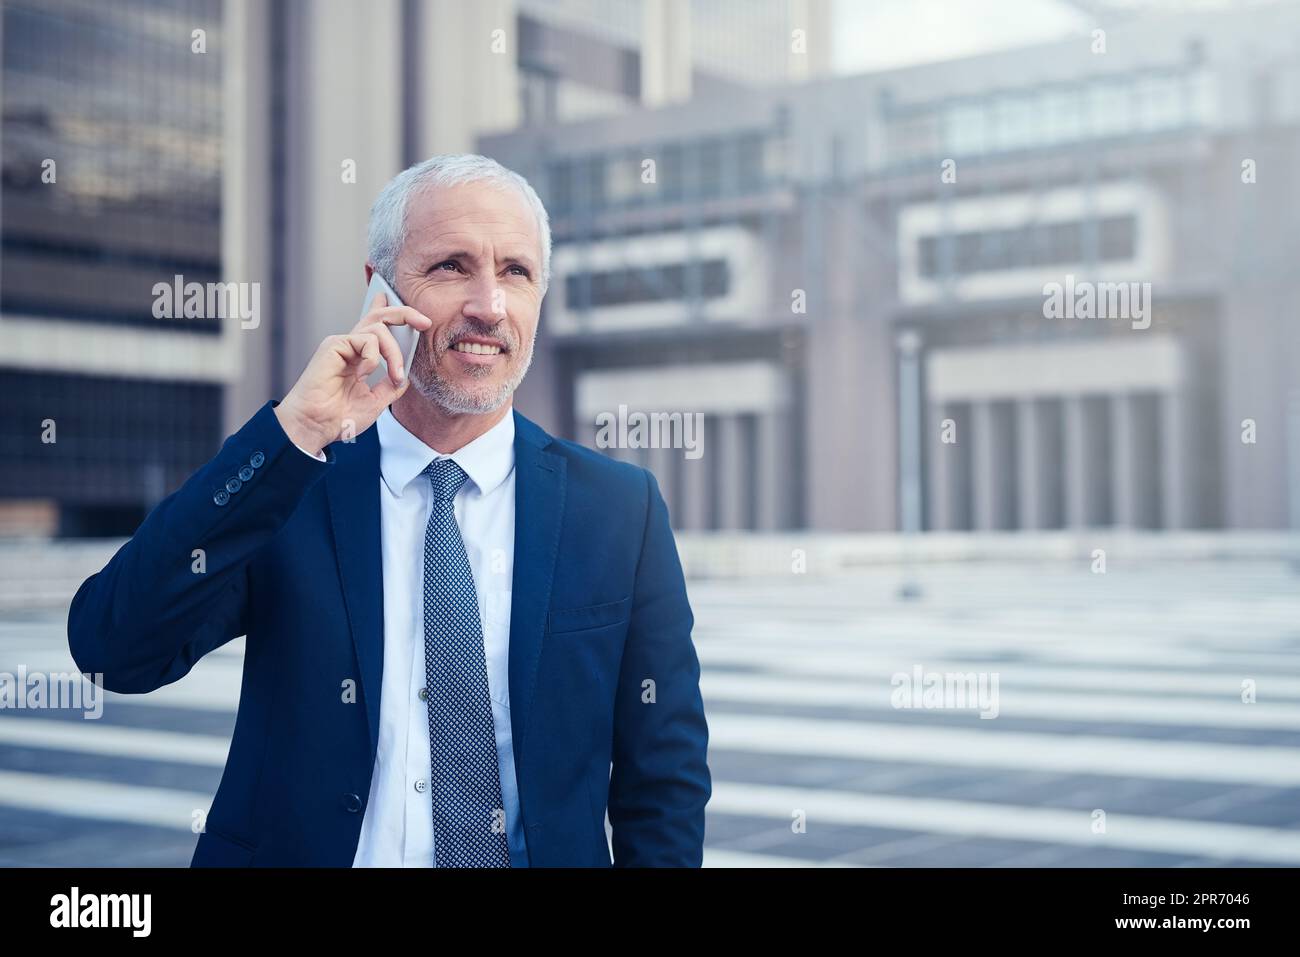 Ive been expecting your call. Shot of a businessman answering his phone while walking to his office in the city. Stock Photo